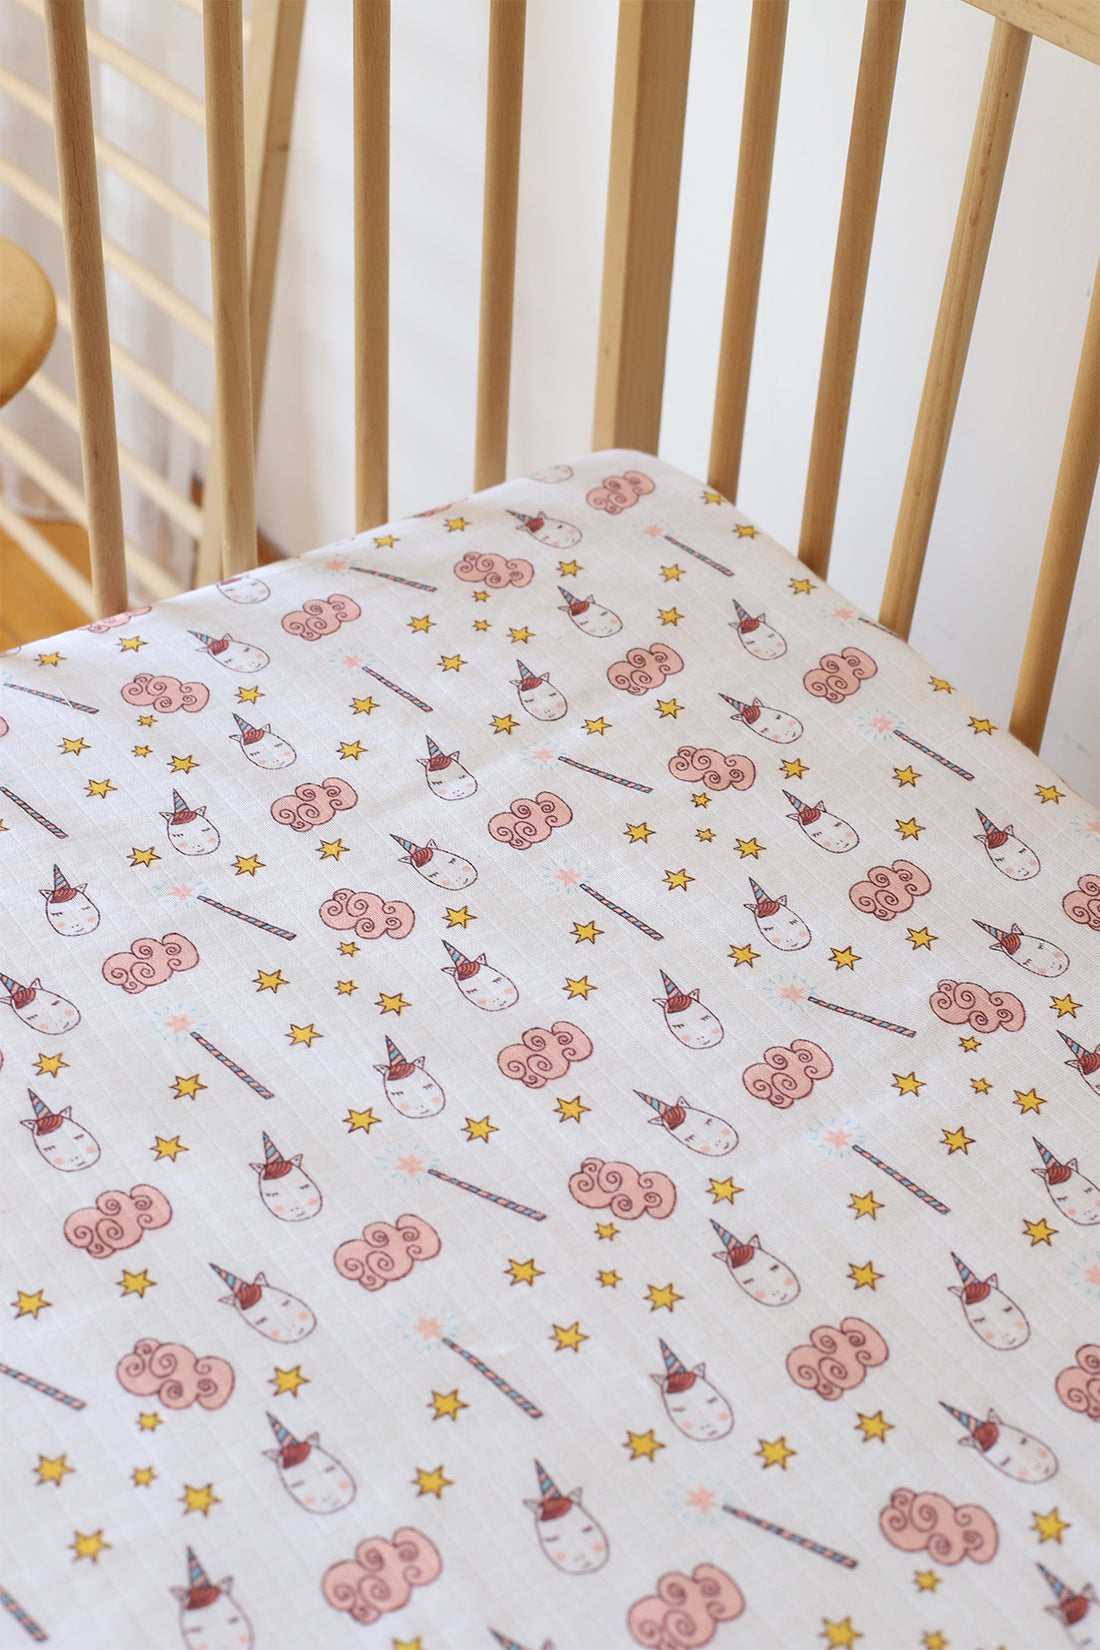 Children's Baby Bedsheet Elastic 2 Layers Muslin Cotton Colorful Patterned 